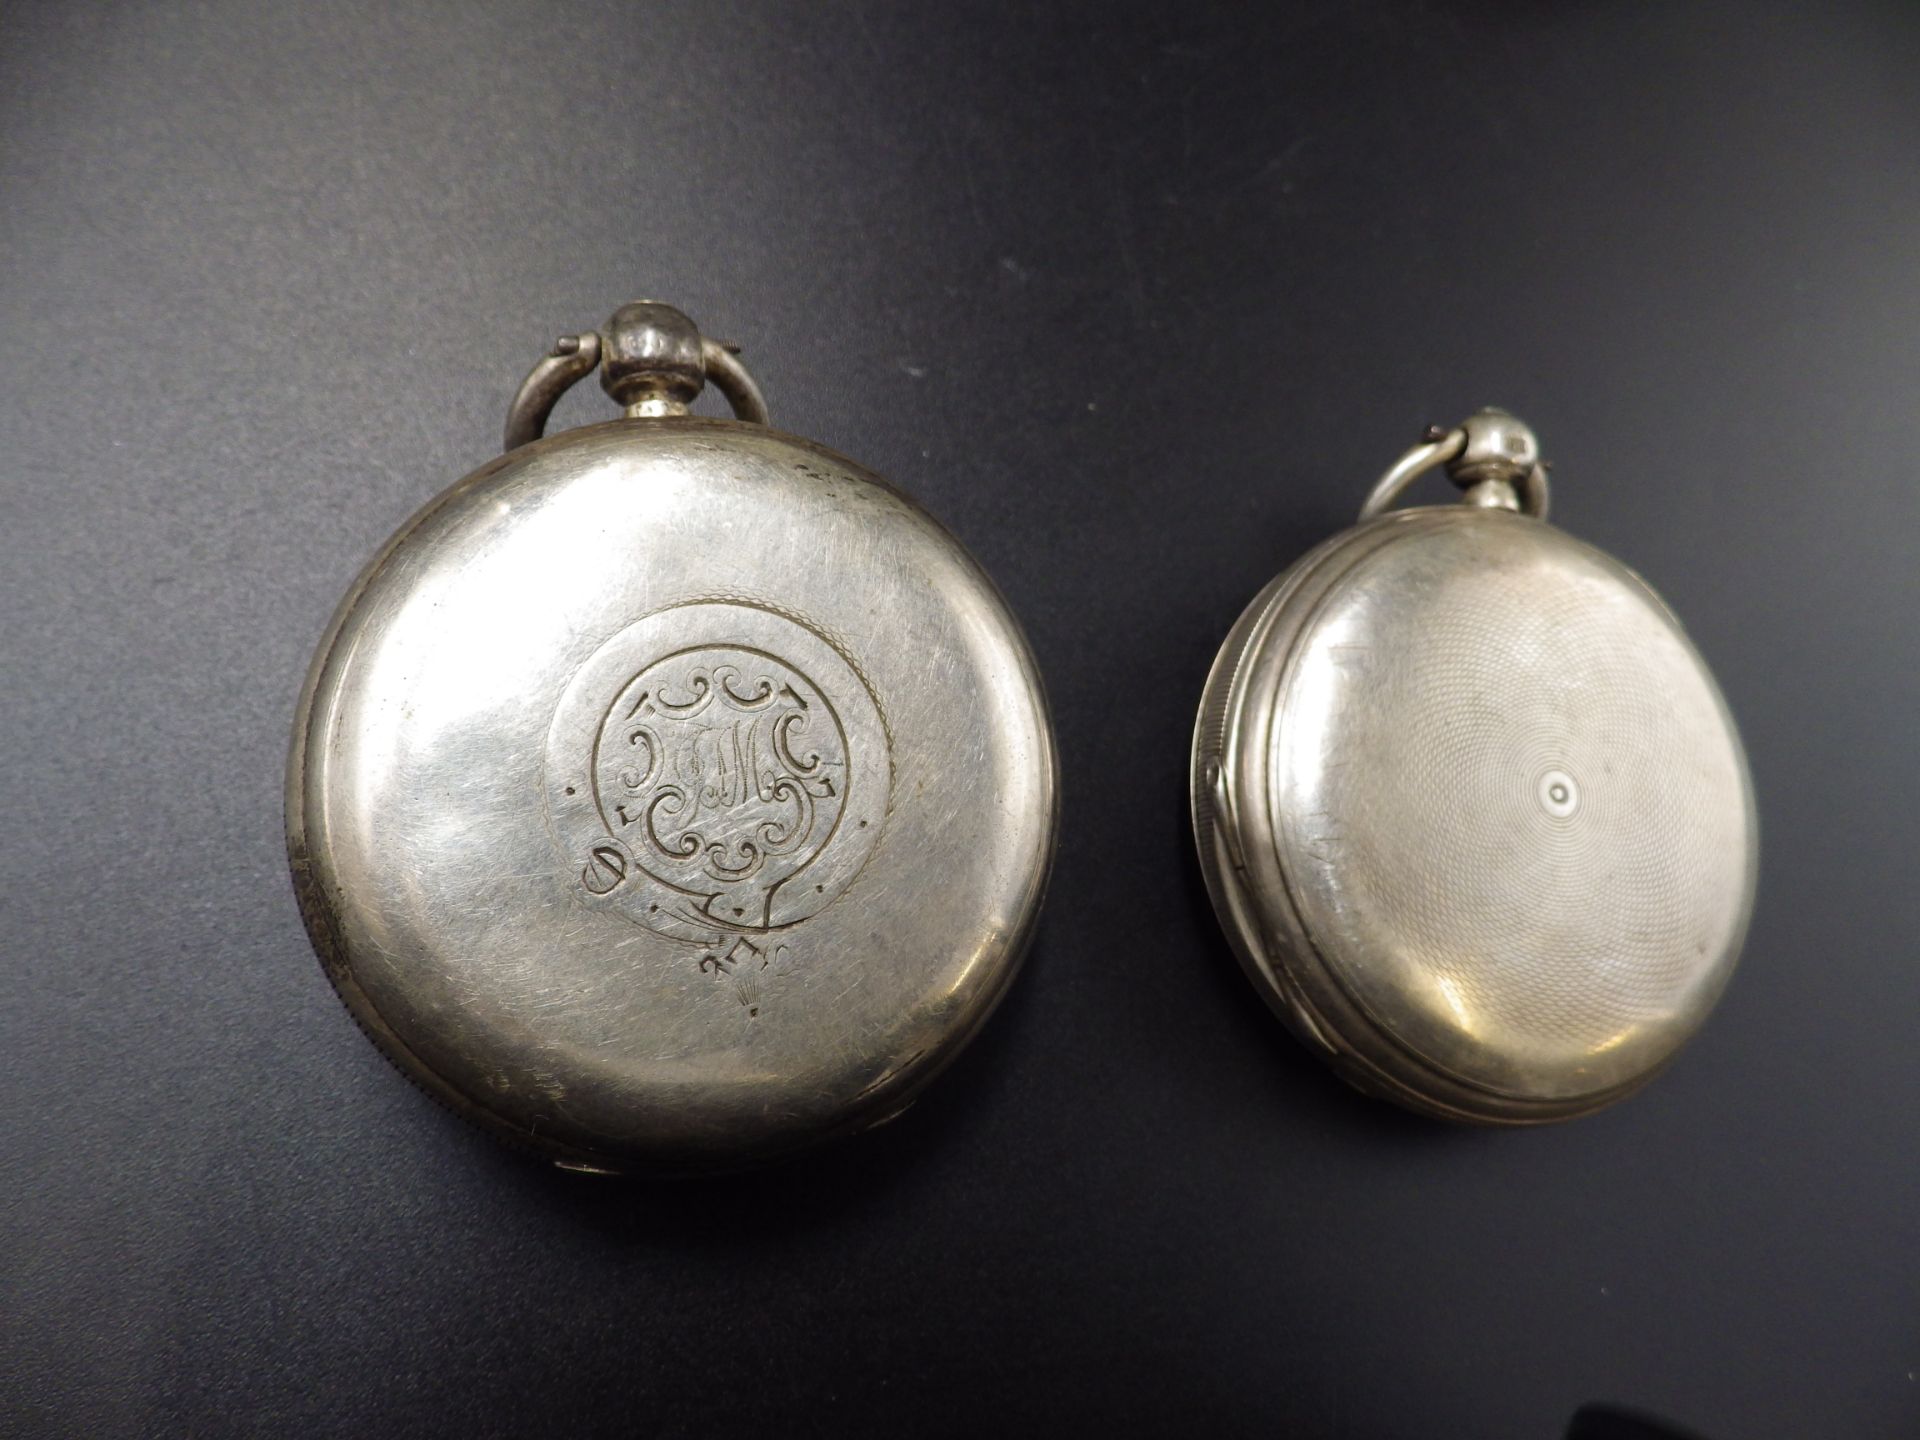 5 pocket watches - 2 are Silver cased both hallmarked Chester 1892 and 1900 hunter pocket watch ( - Image 4 of 6